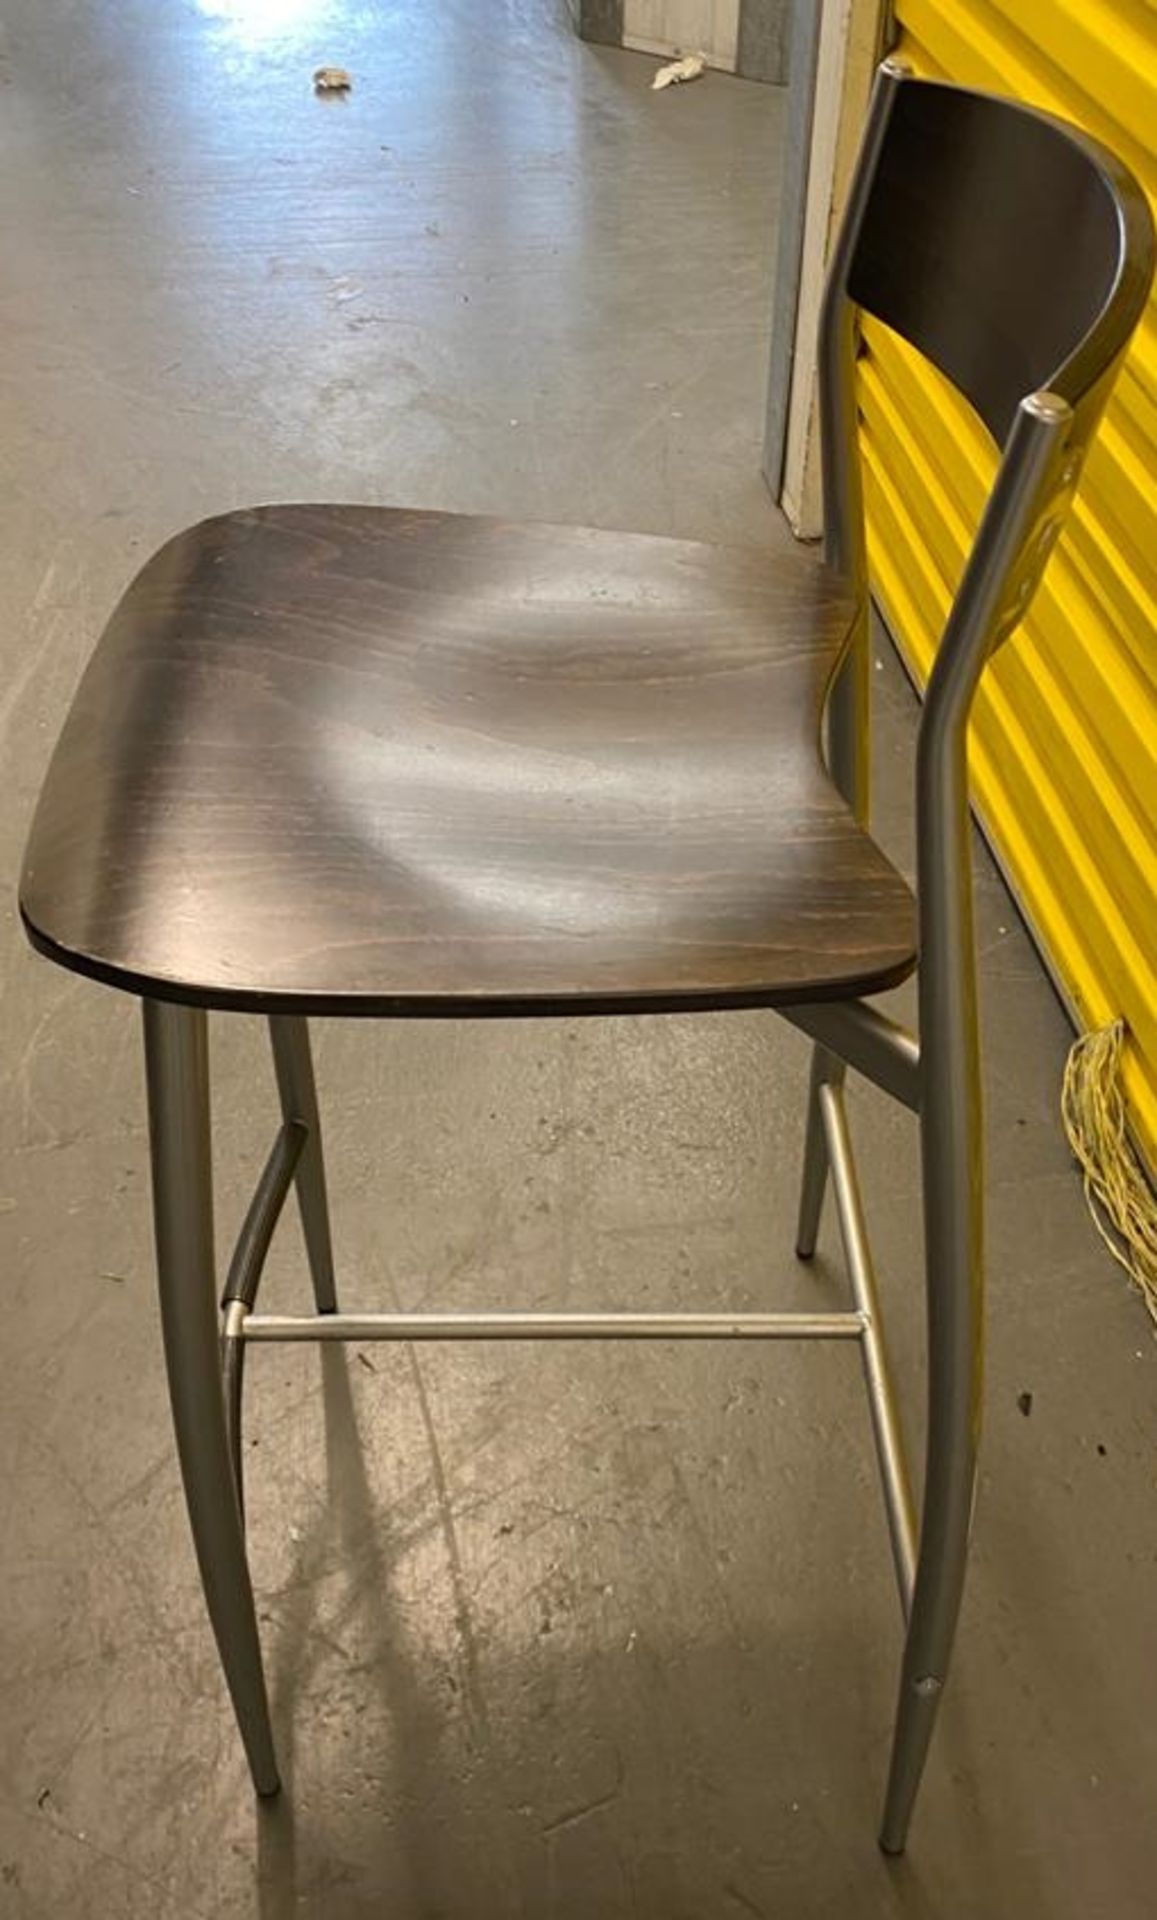 4 x Altek Bar Stools - Made in Italy - Supplied in Dark Wood - CL667 - Location: Brighton, Sussex, - Image 9 of 9